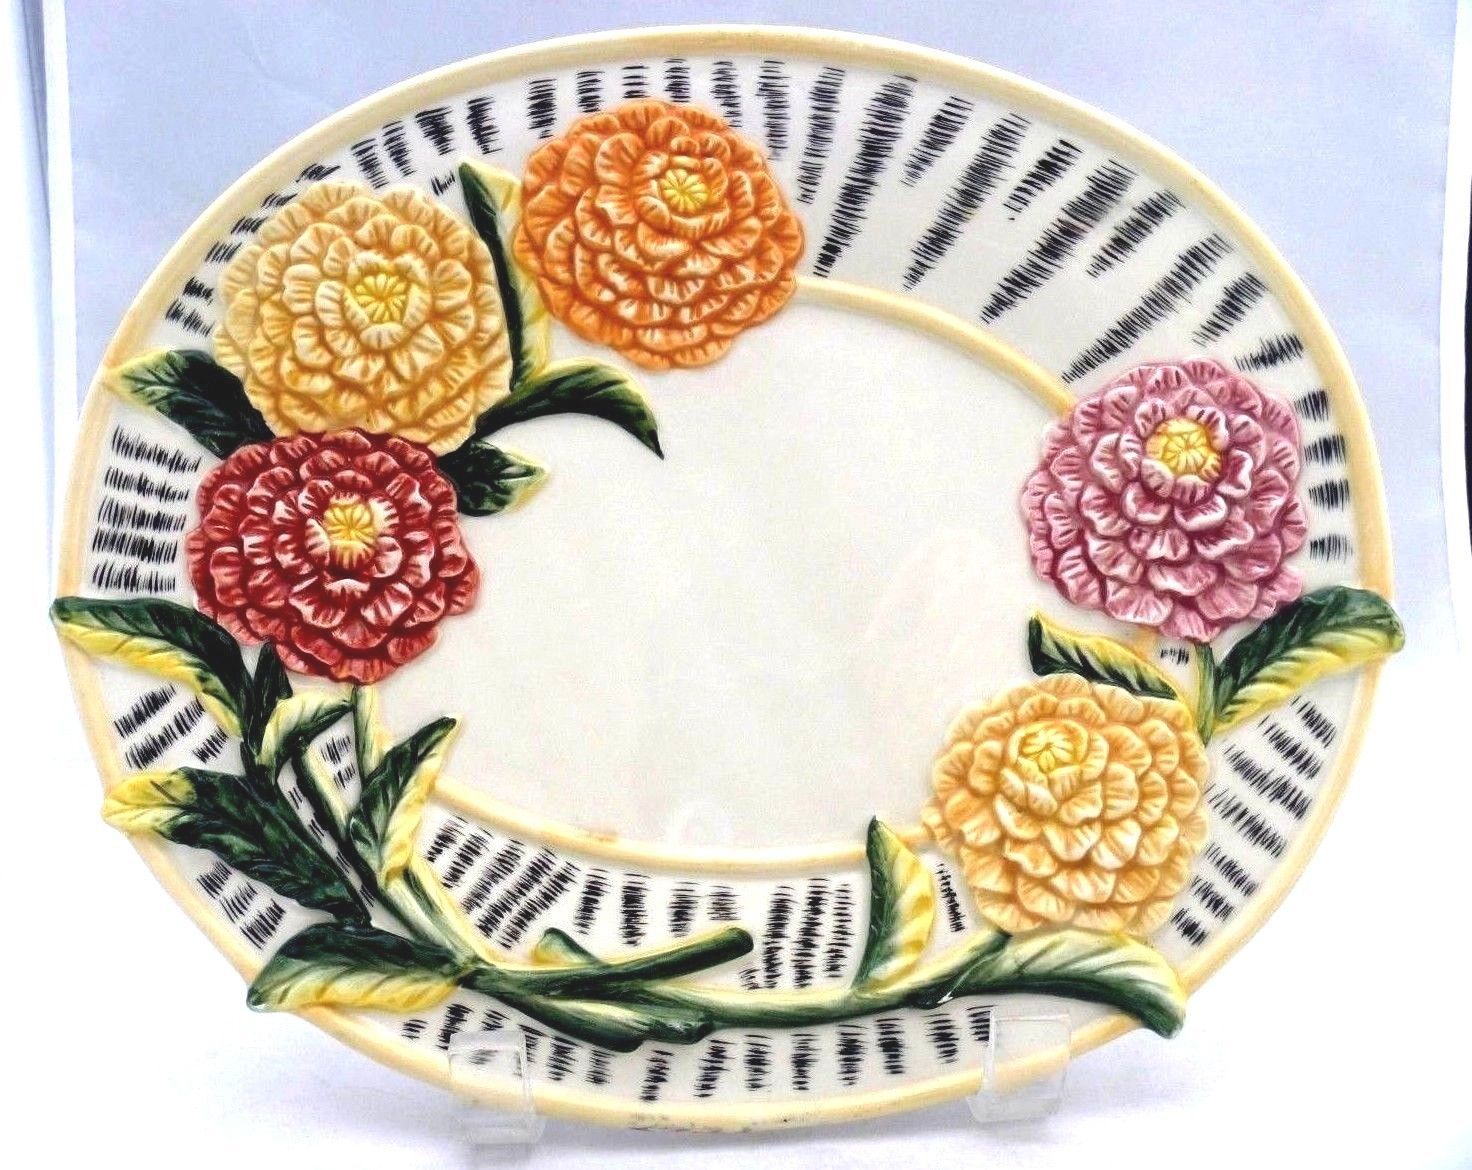 Primary image for Fits and Floyd Essentials, embossed Dahlia flowers OVAL 9 ¼” decorative plate